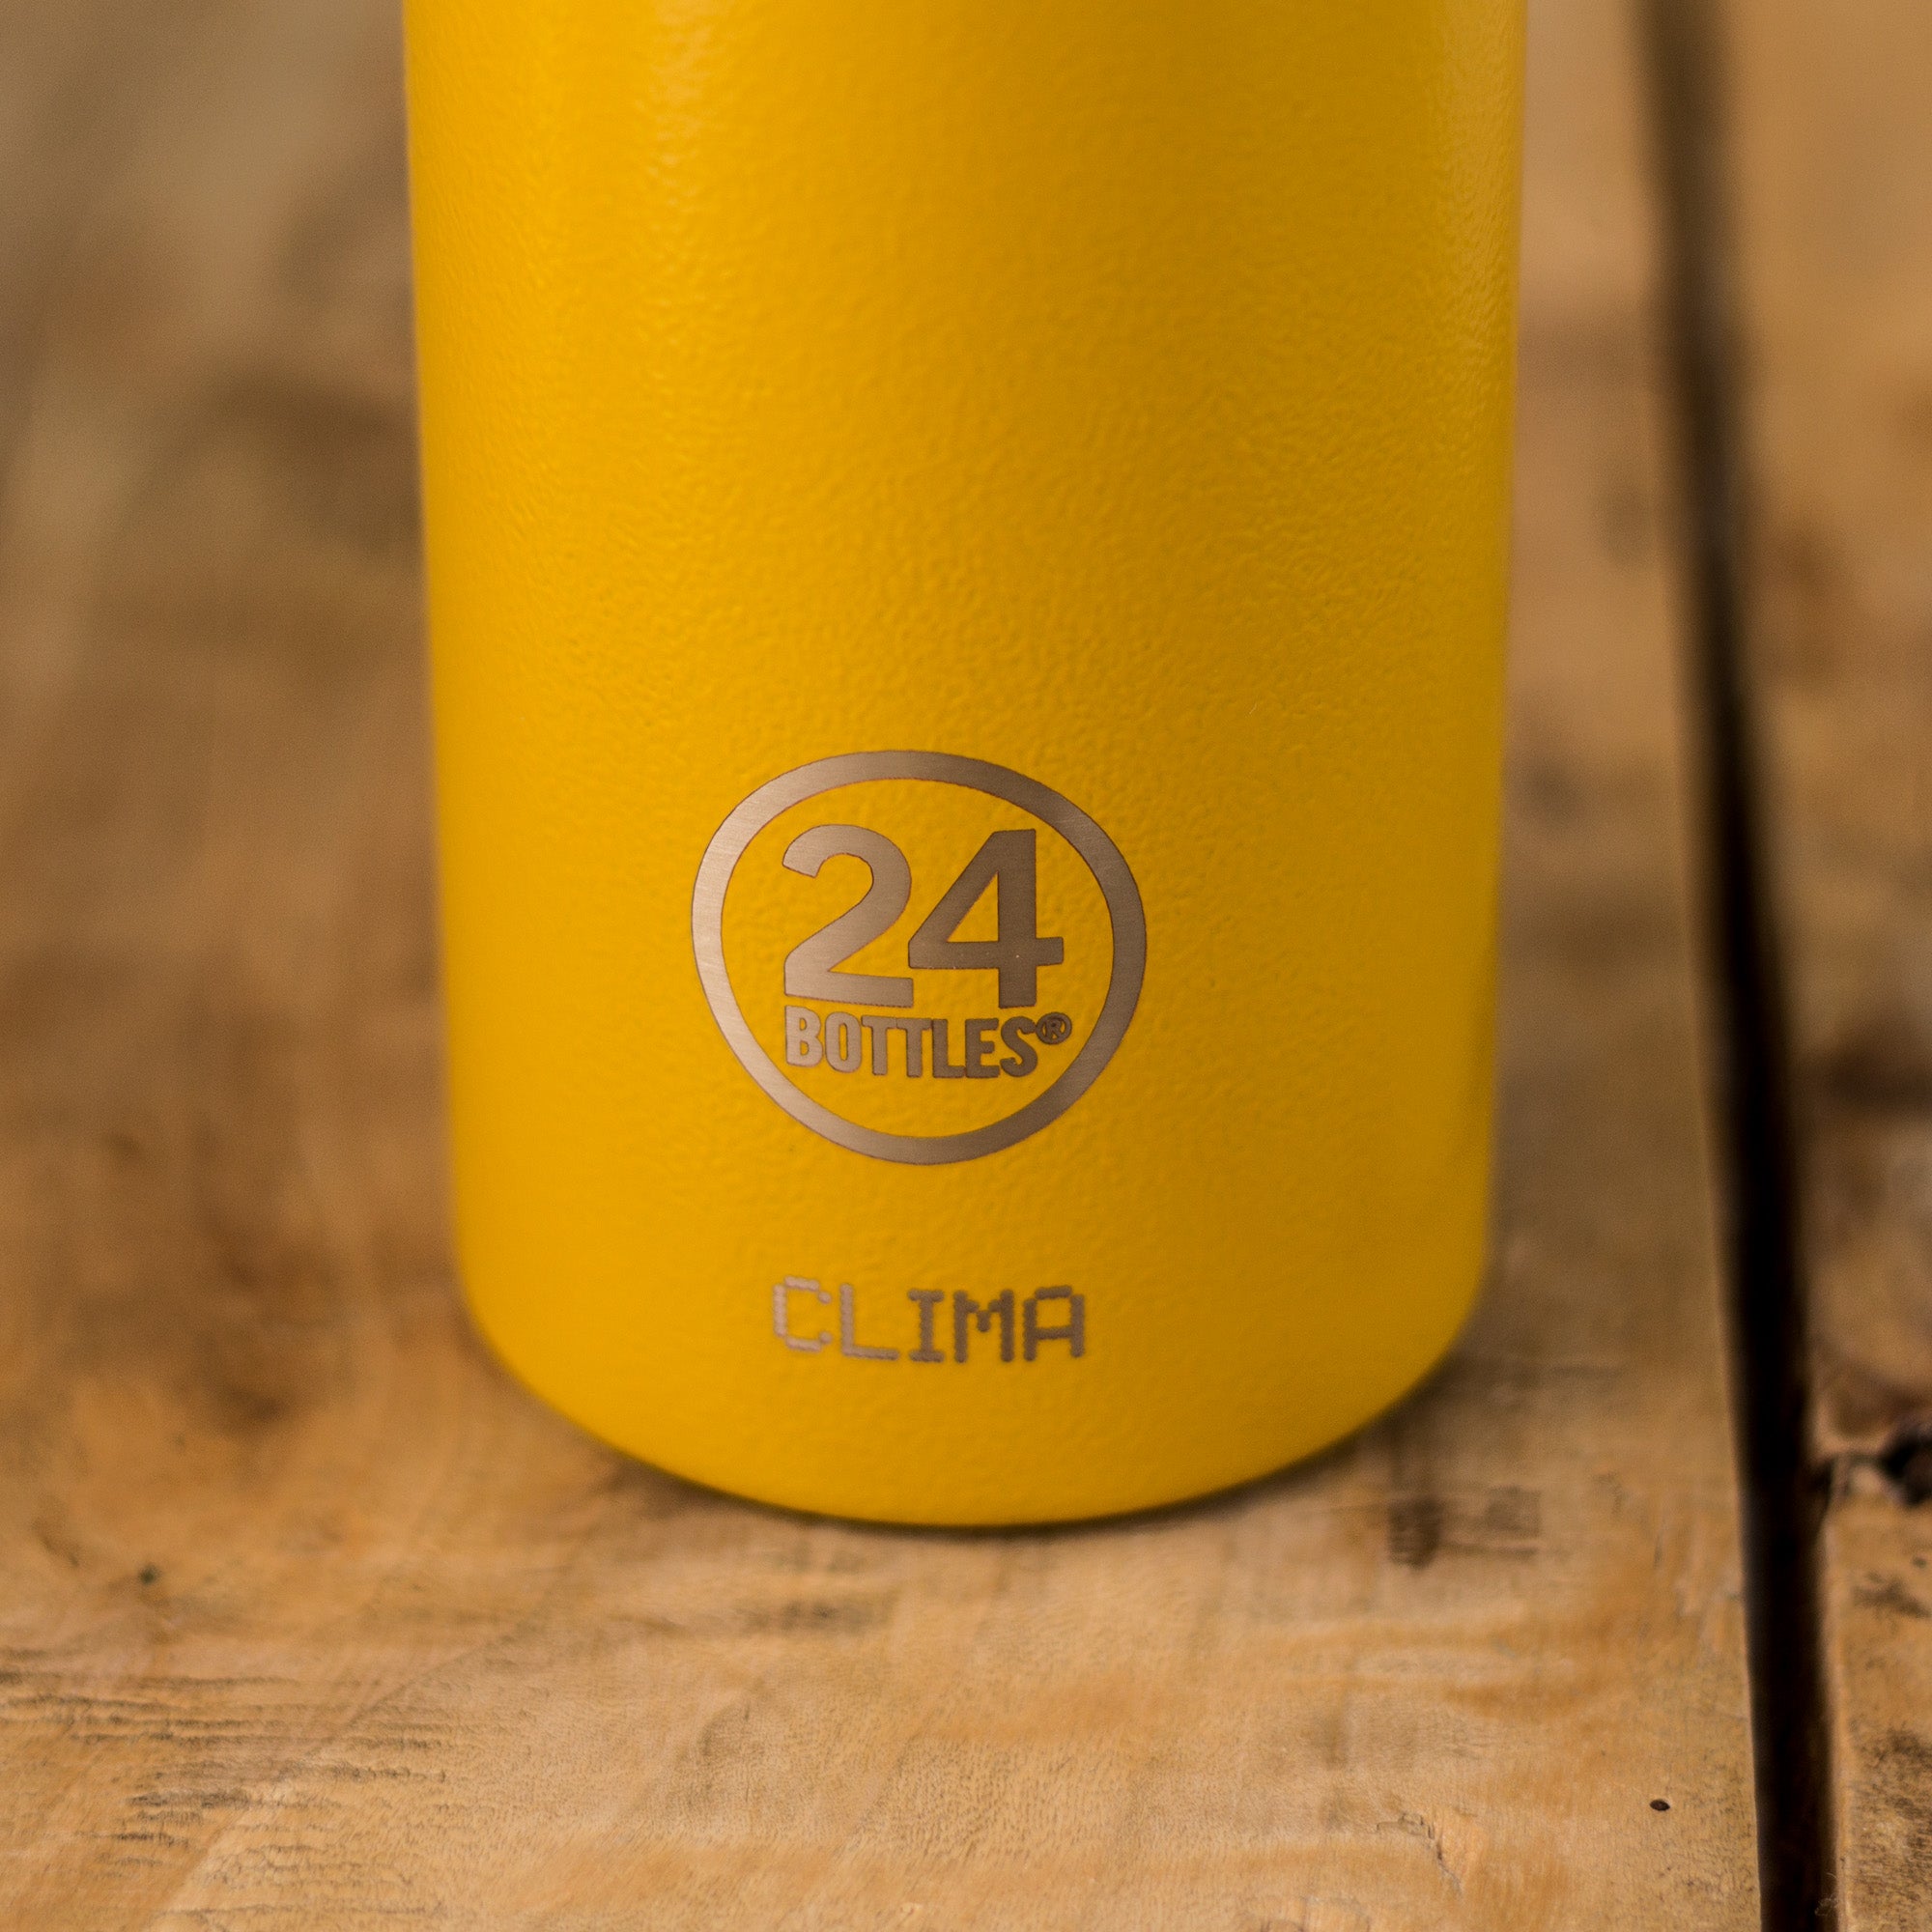 Thermos Bottle